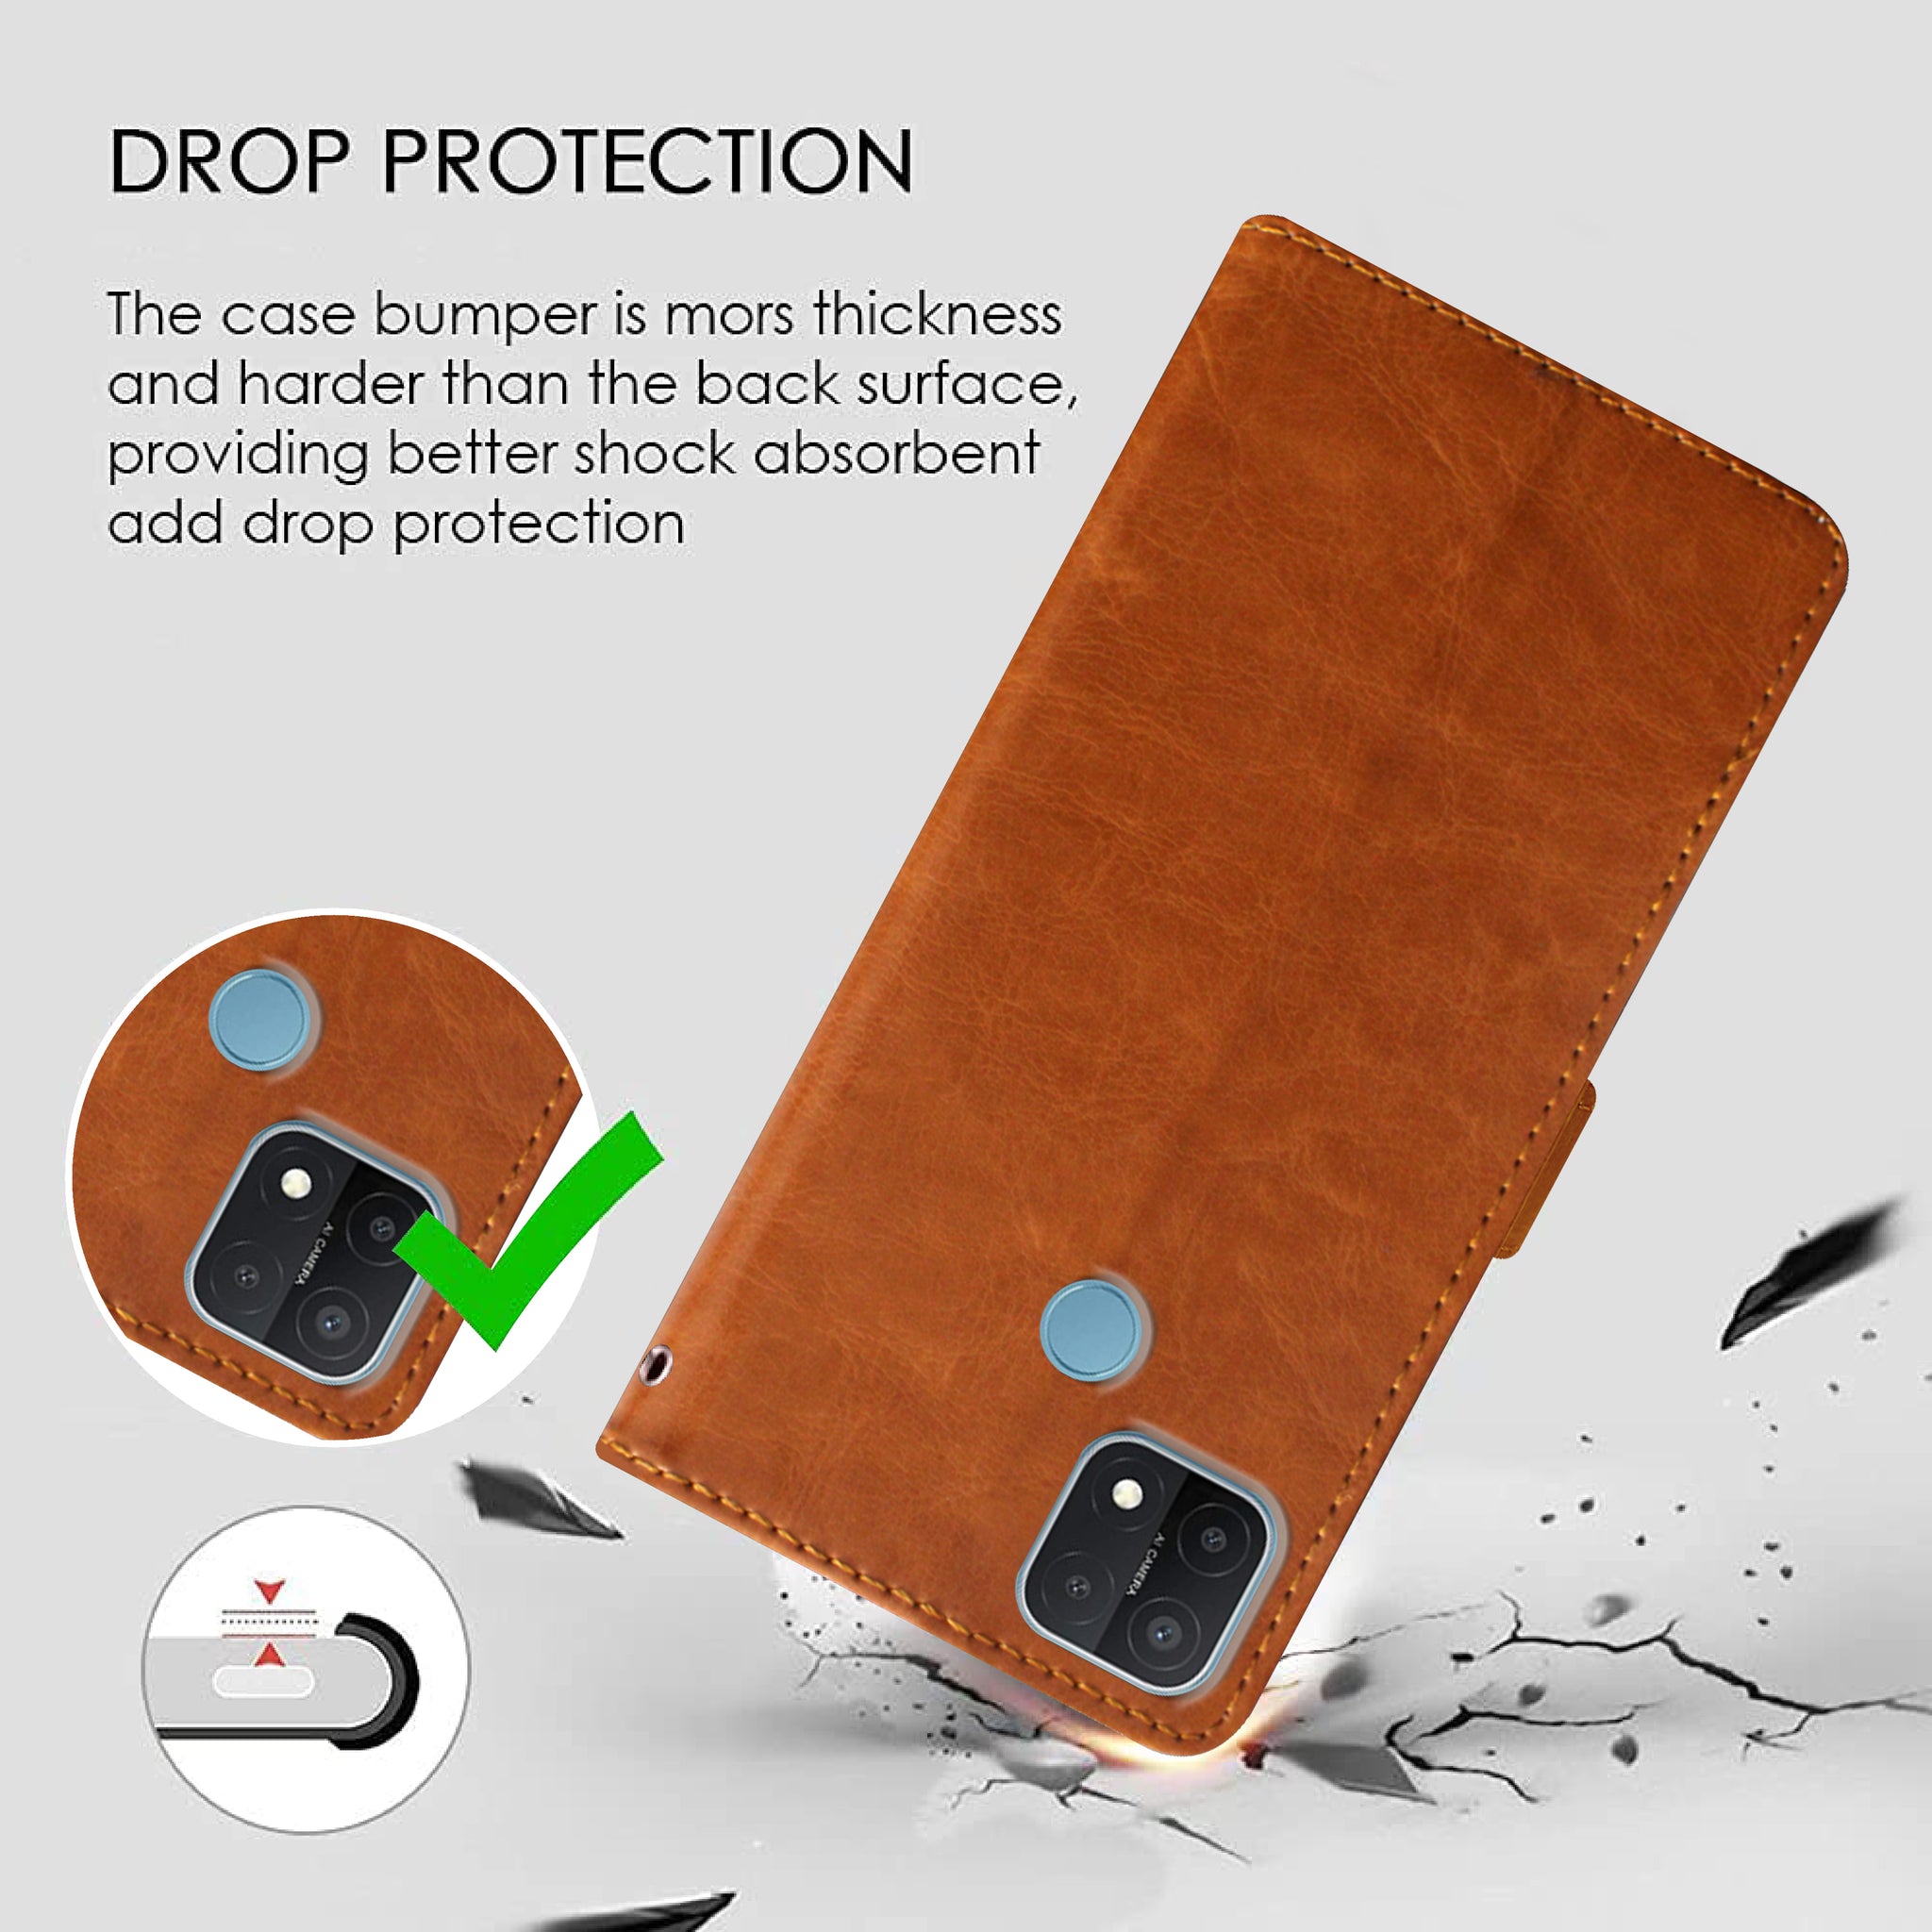 Premium Wallet Flip Cover for Oppo A15 / Oppo A15s